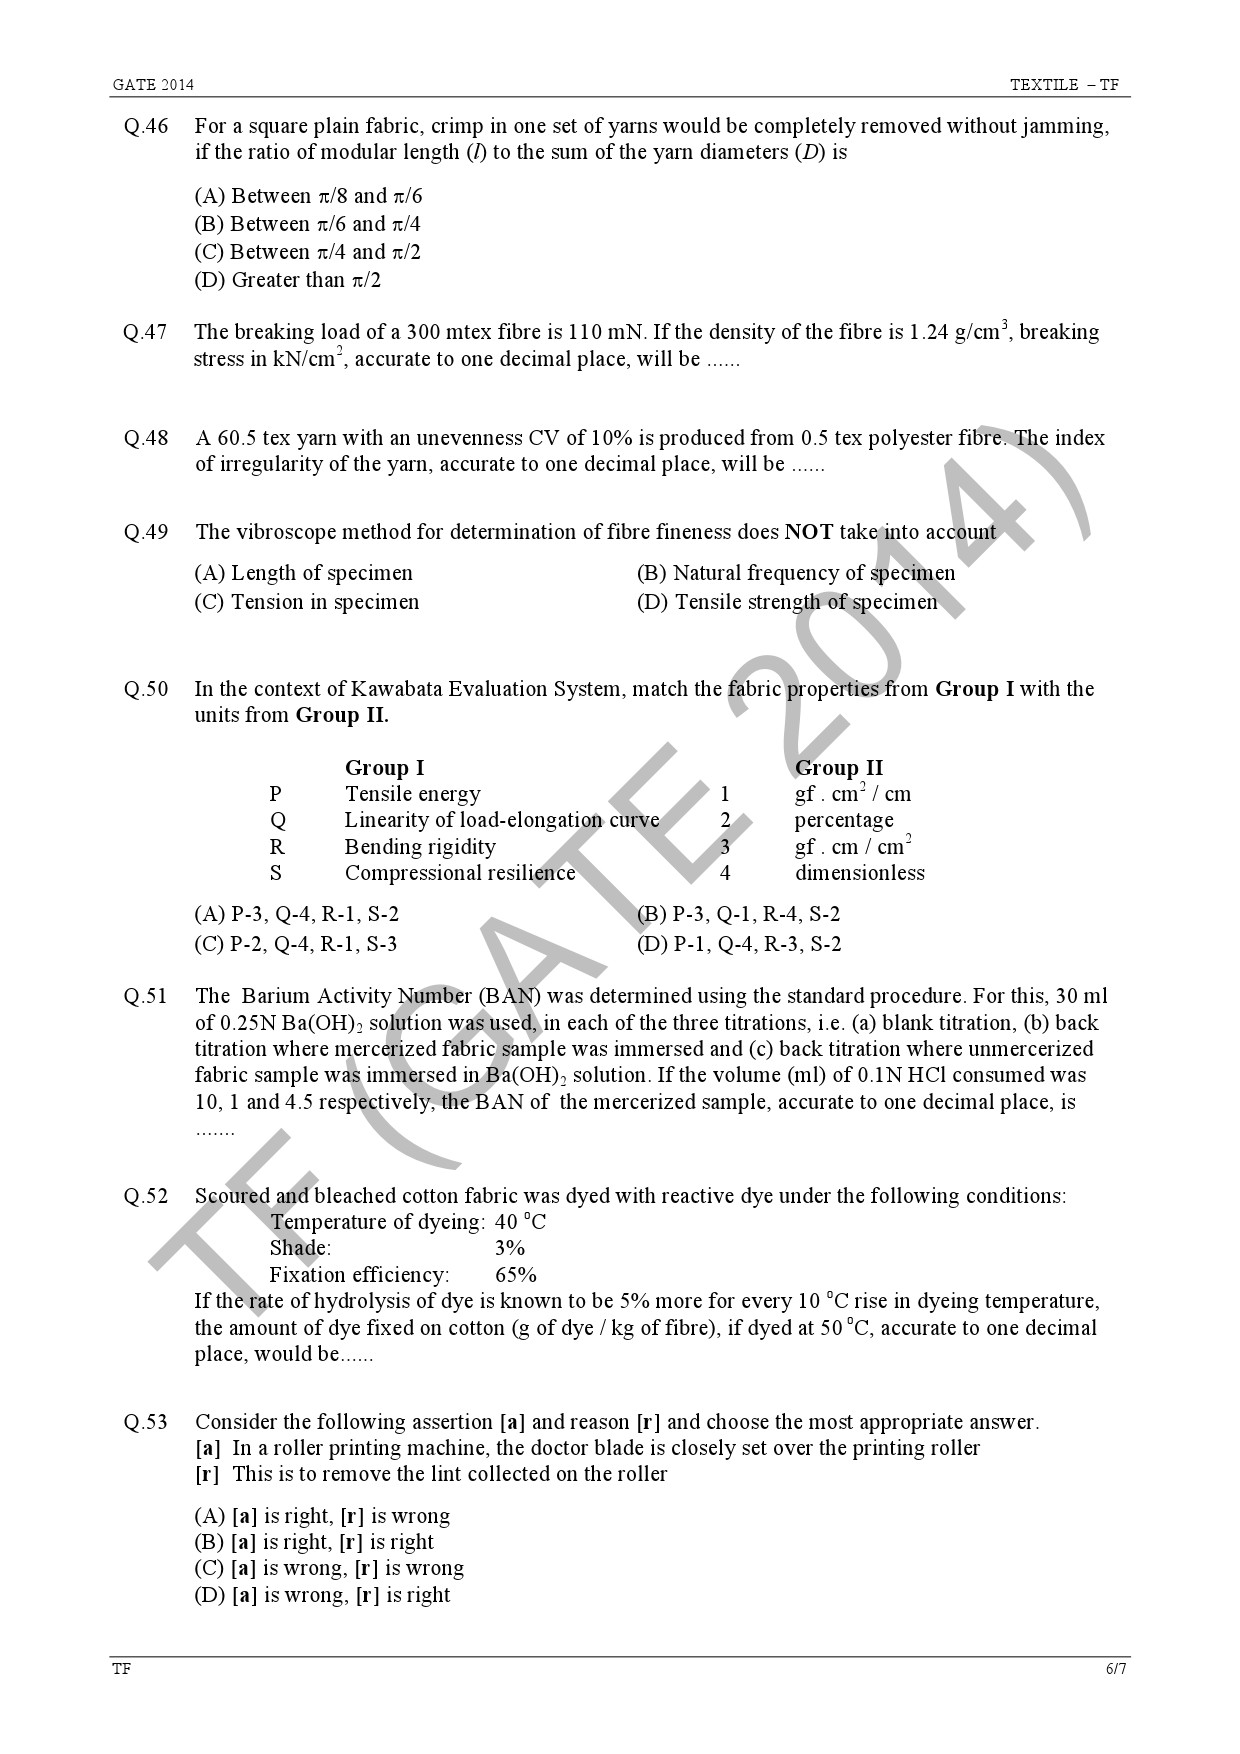 GATE Exam Question Paper 2014 Textile Engineering and Fibre Science 12